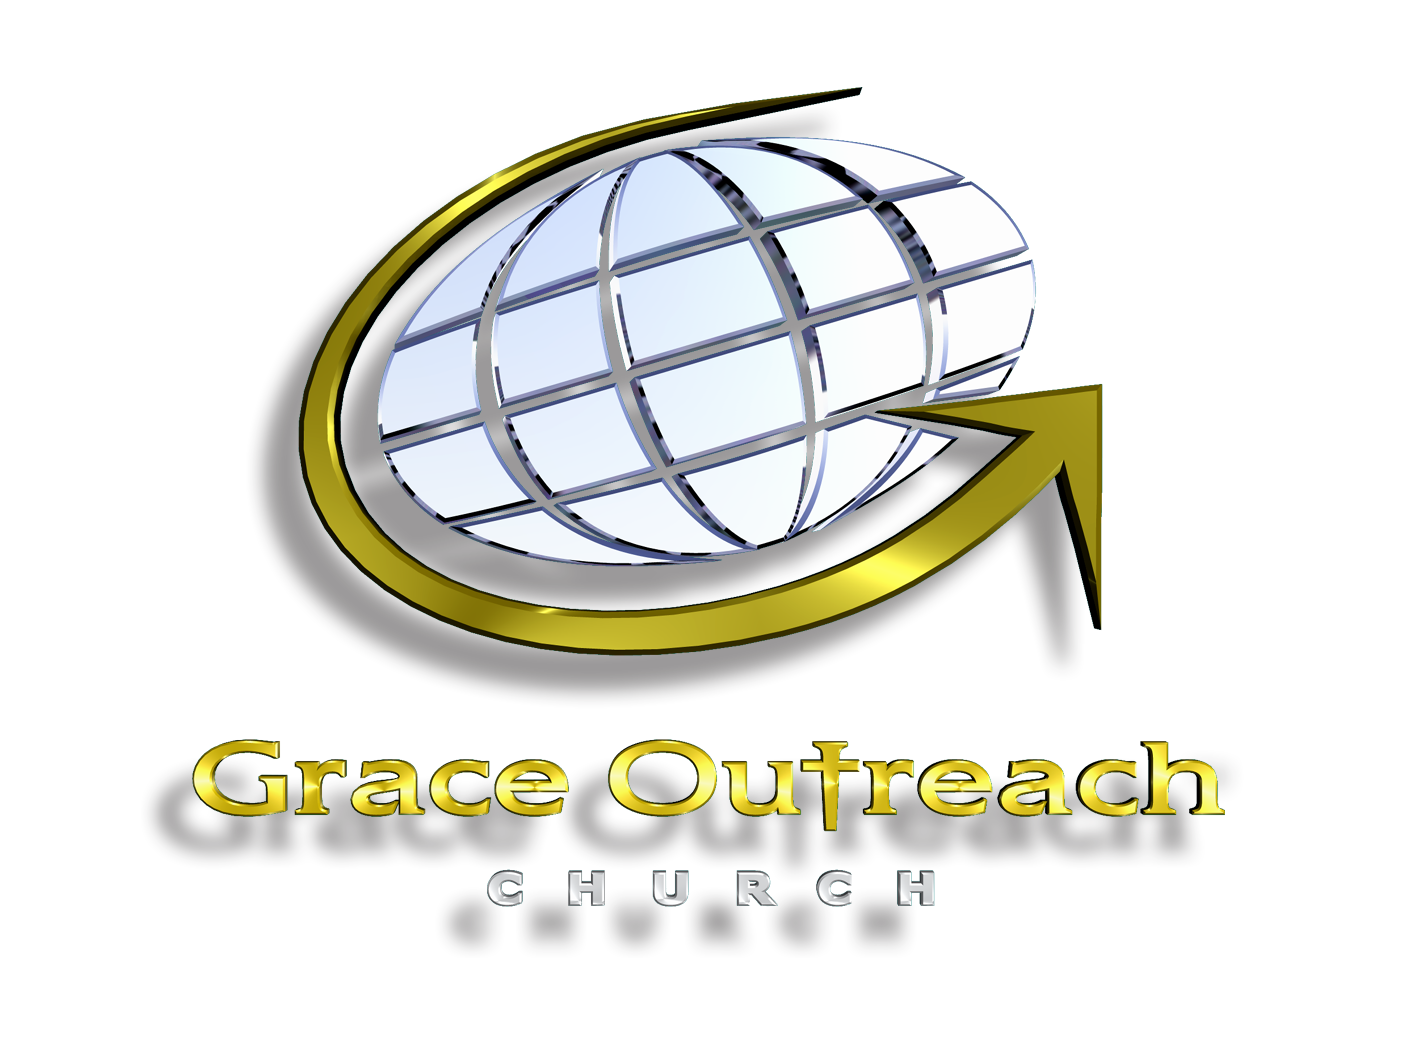 EVENTS AT GRACE OUTREACH CHURCH